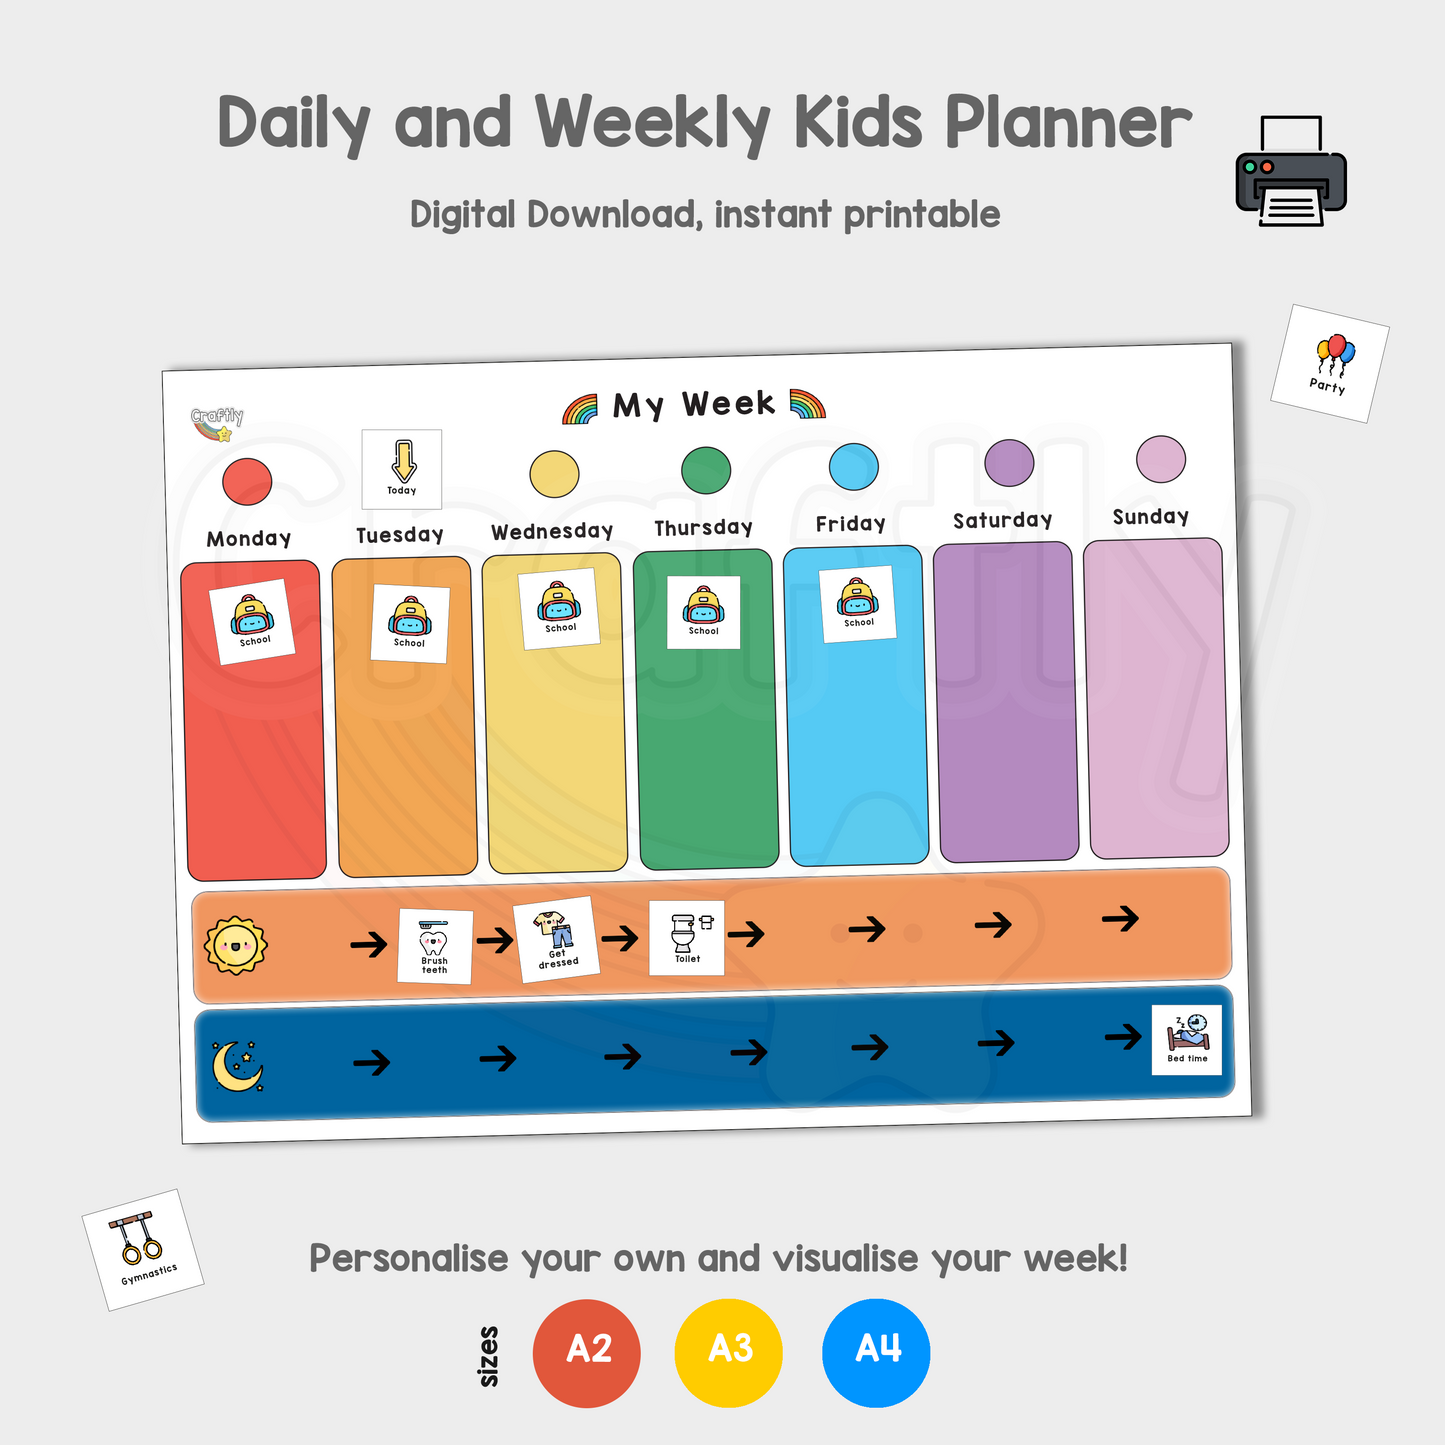 Weekly and Daily Childrens Weekly Planner